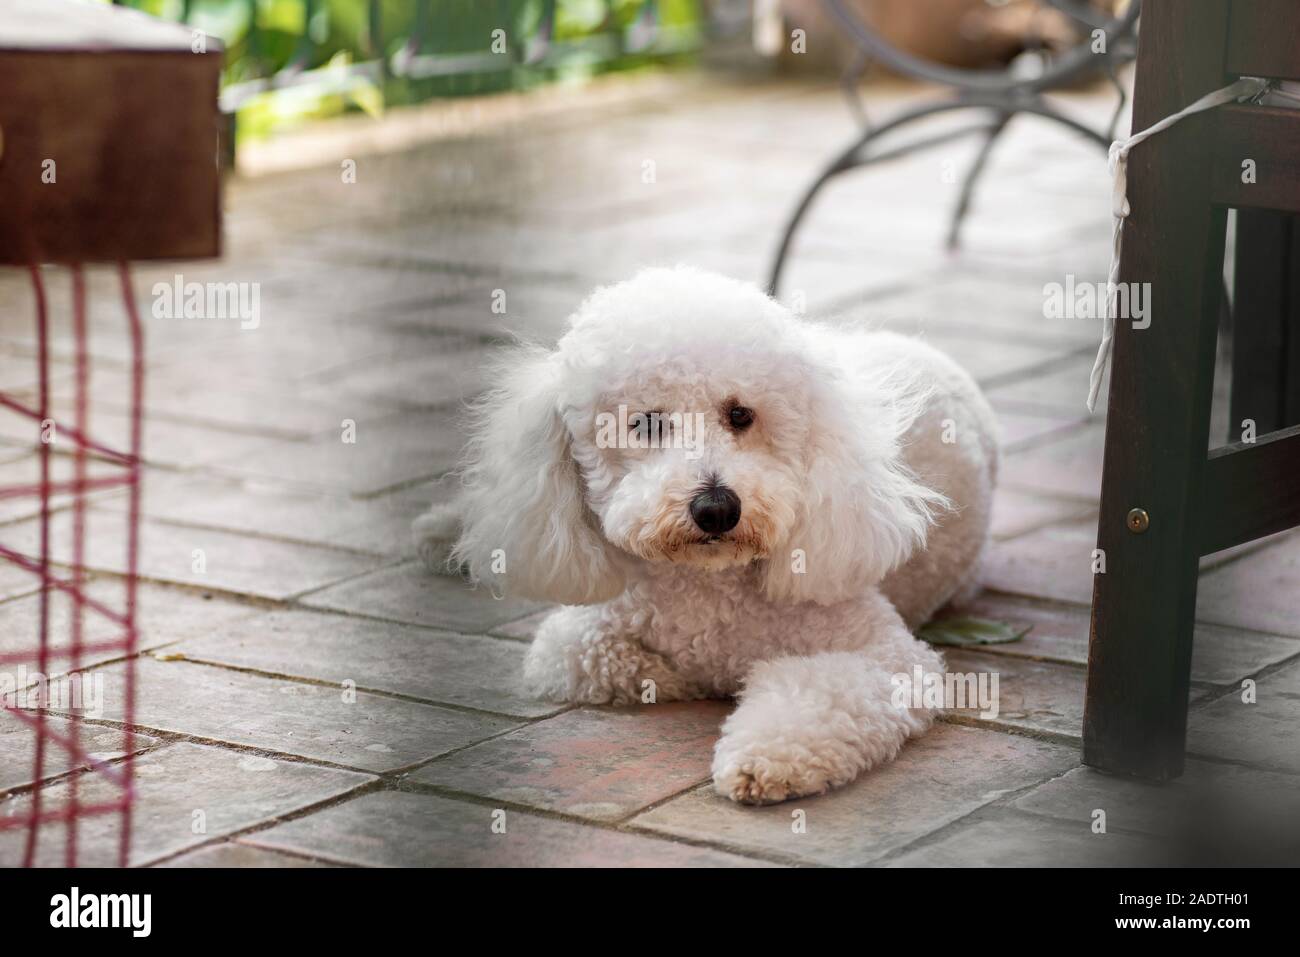 Cute little curly white poodle lying on the tiles of an outdoor patio keeping a watchful eye between the furniture in a low angle view Stock Photo